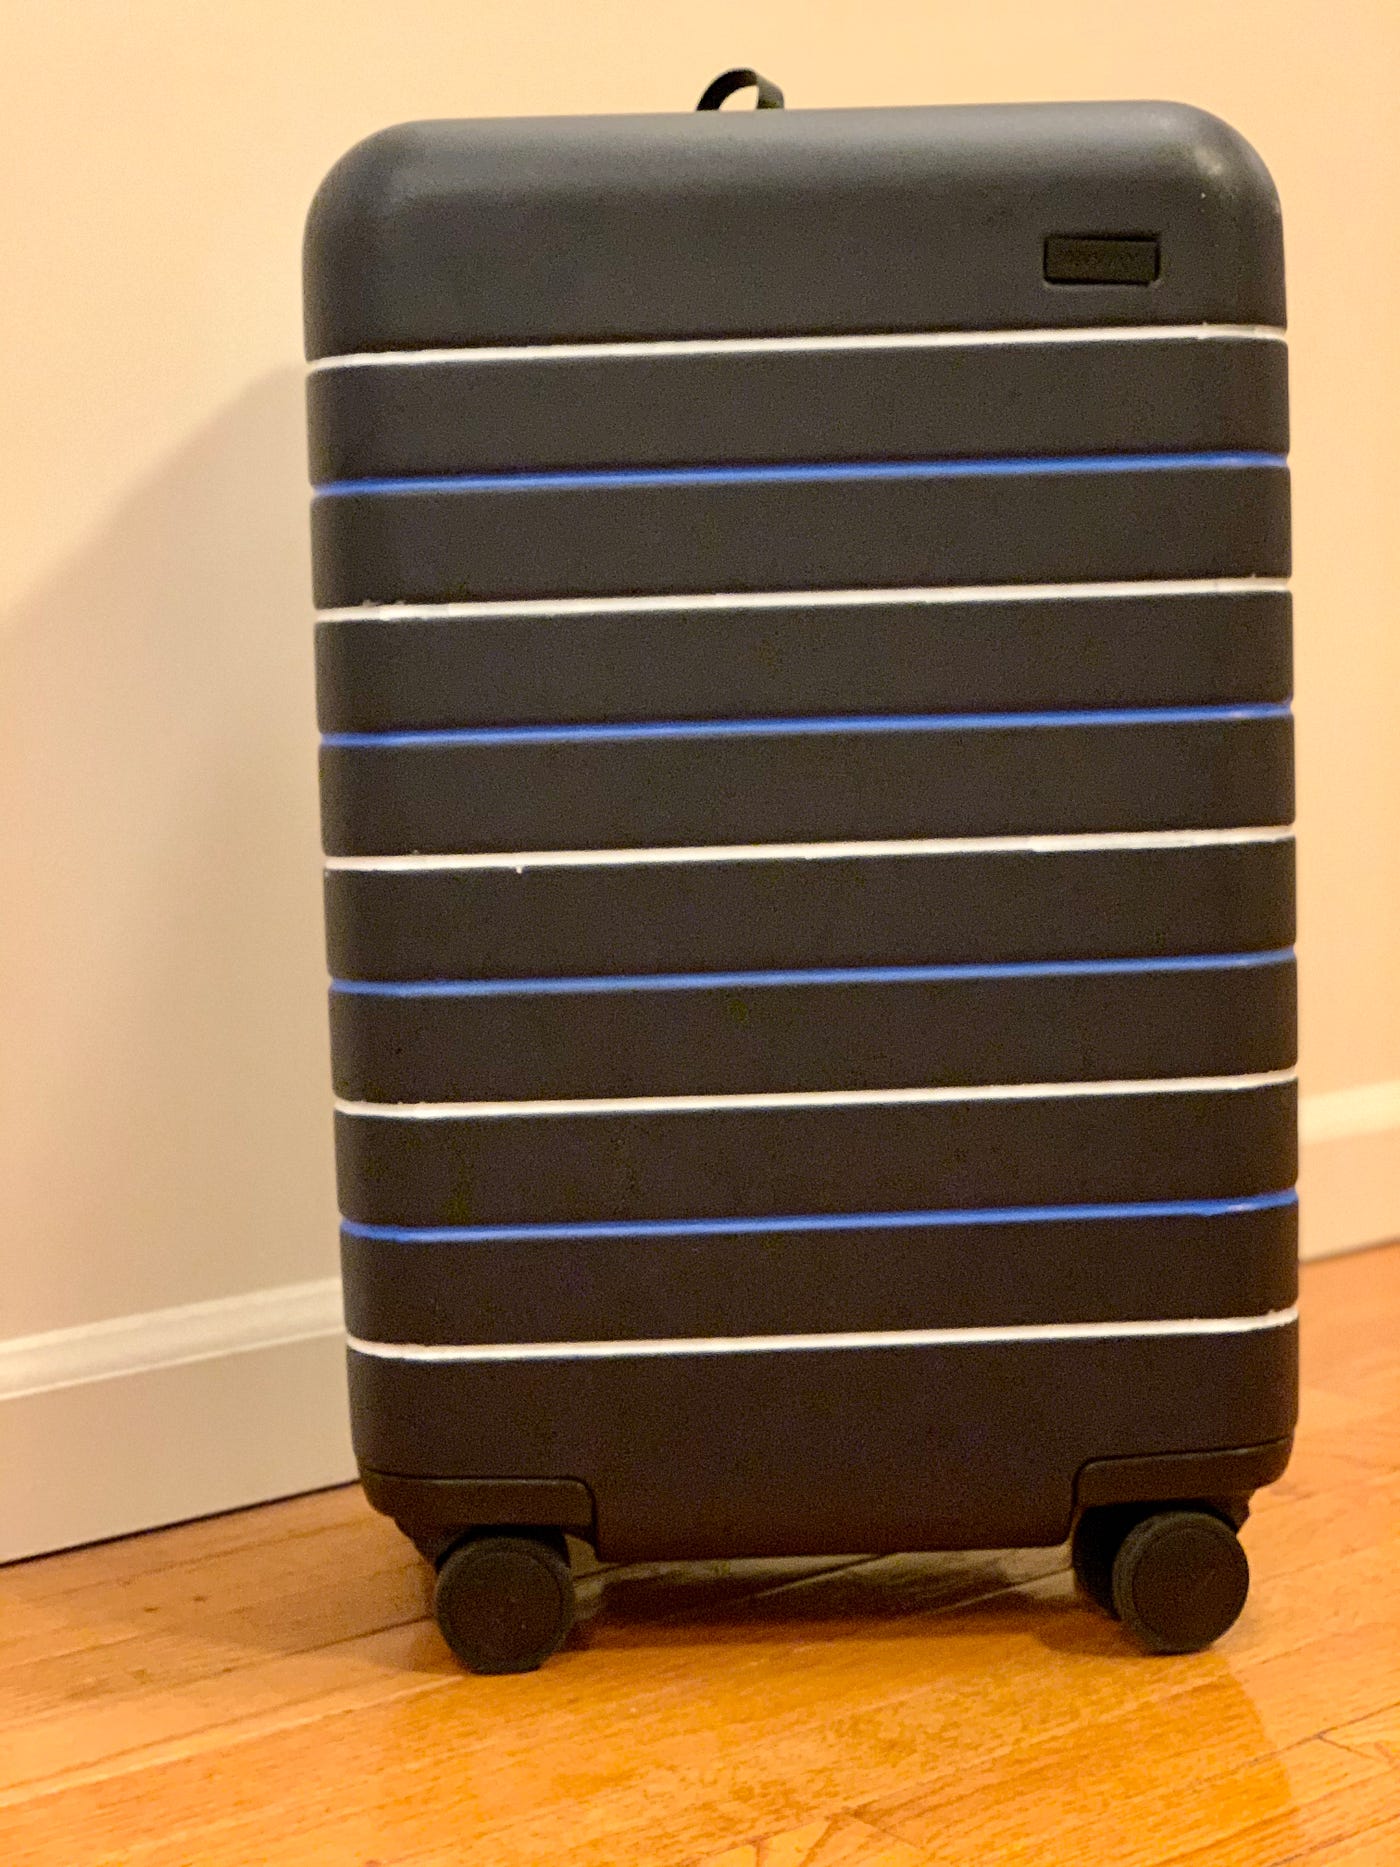 Ode to Paint Pens…or How I Transformed a Boring Away Suitcase (DIY FTW!), by LaTeisha Moore